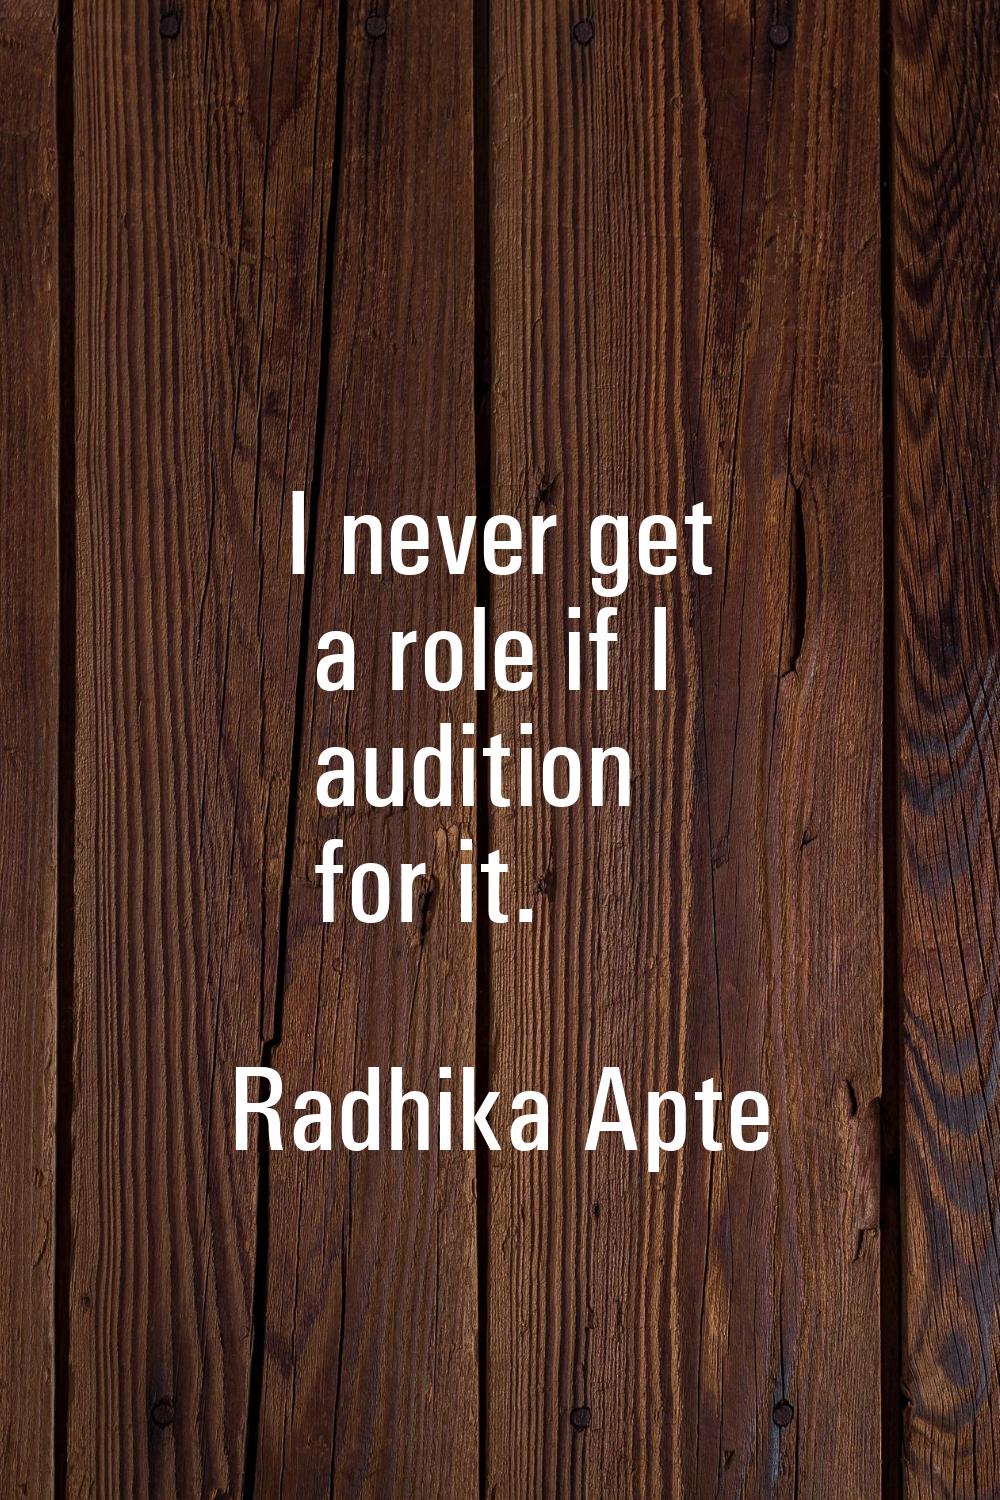 I never get a role if I audition for it.